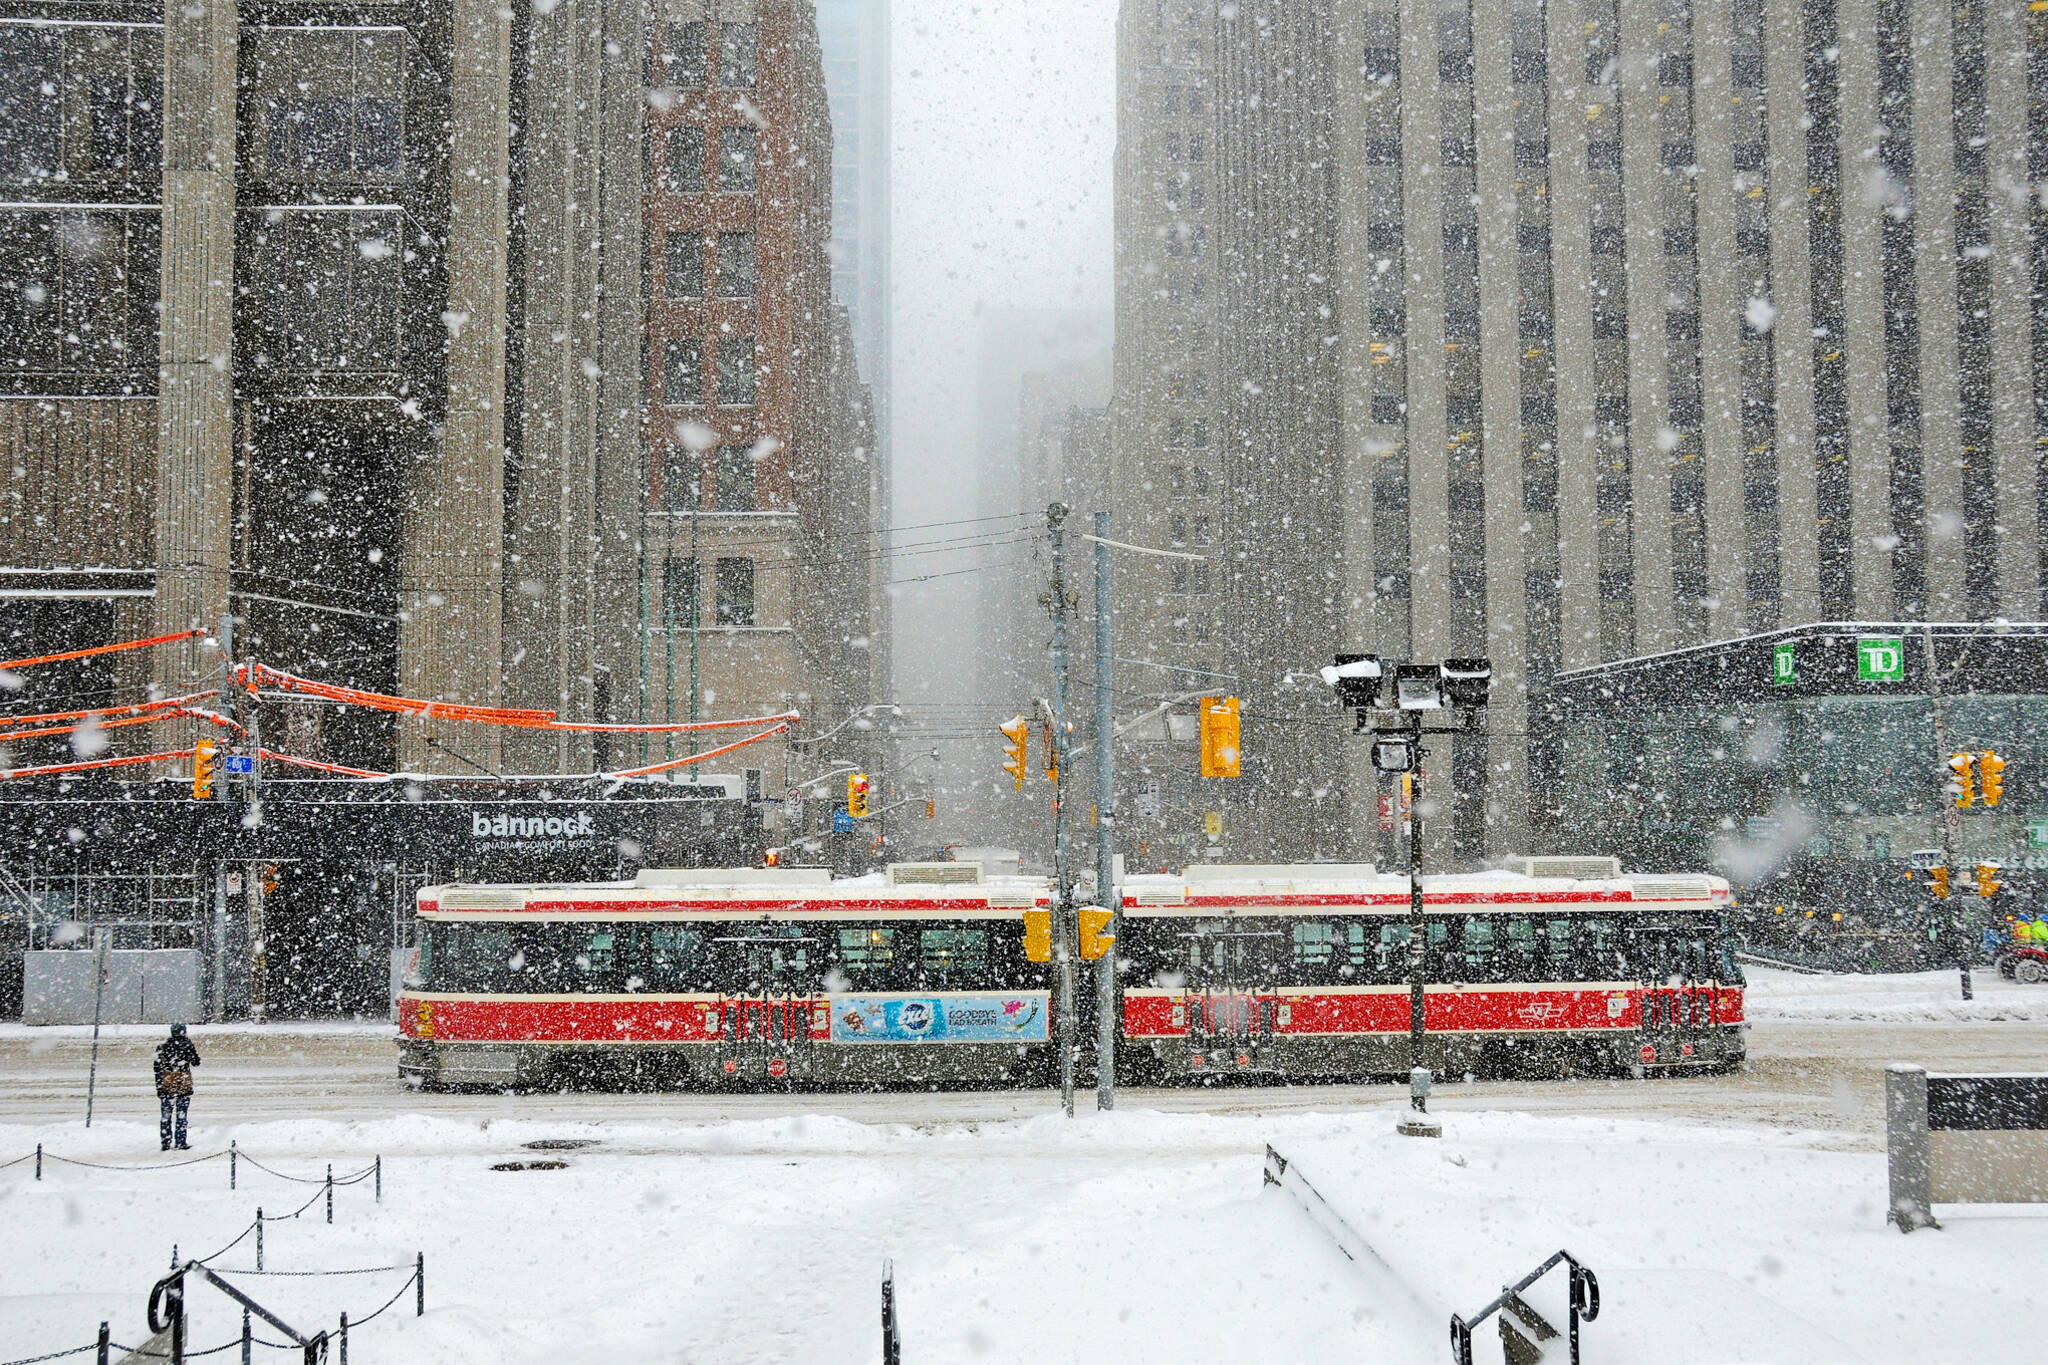 There's lots more snow on the way for Toronto this week